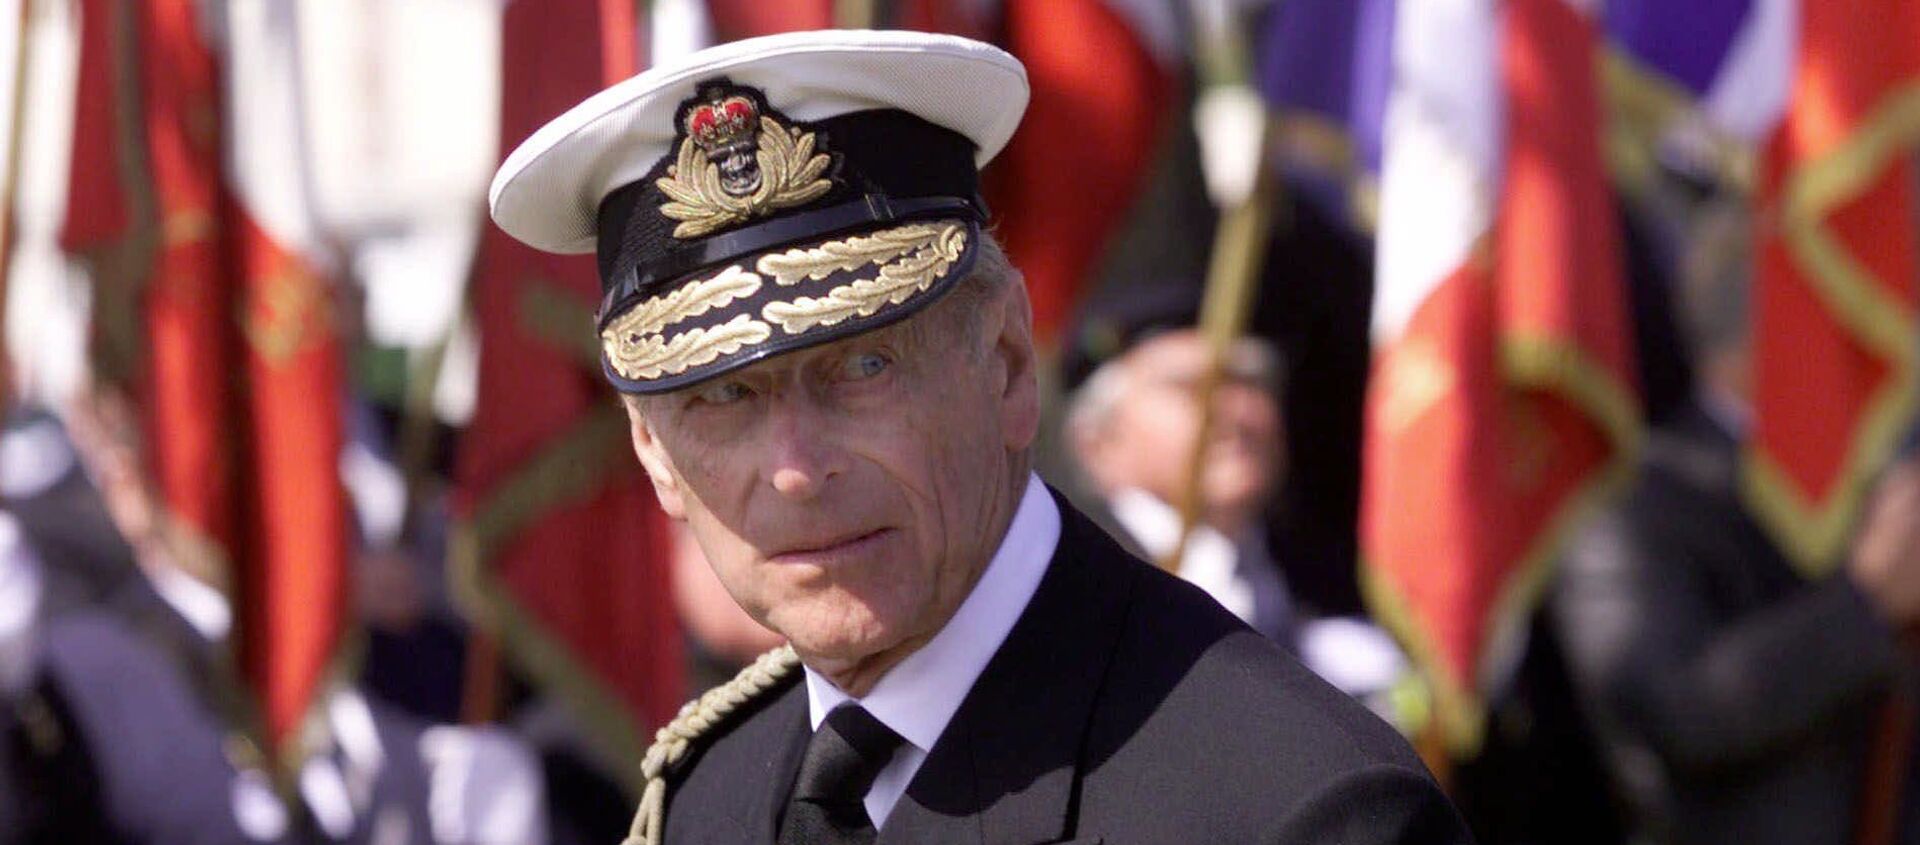 Britain's Prince Philip  appears in front of flags during a ceremony commemorating the D-Day landing in Ouistreham, Normandy, France, Tuesday June 6, 2000 - Sputnik International, 1920, 09.04.2021